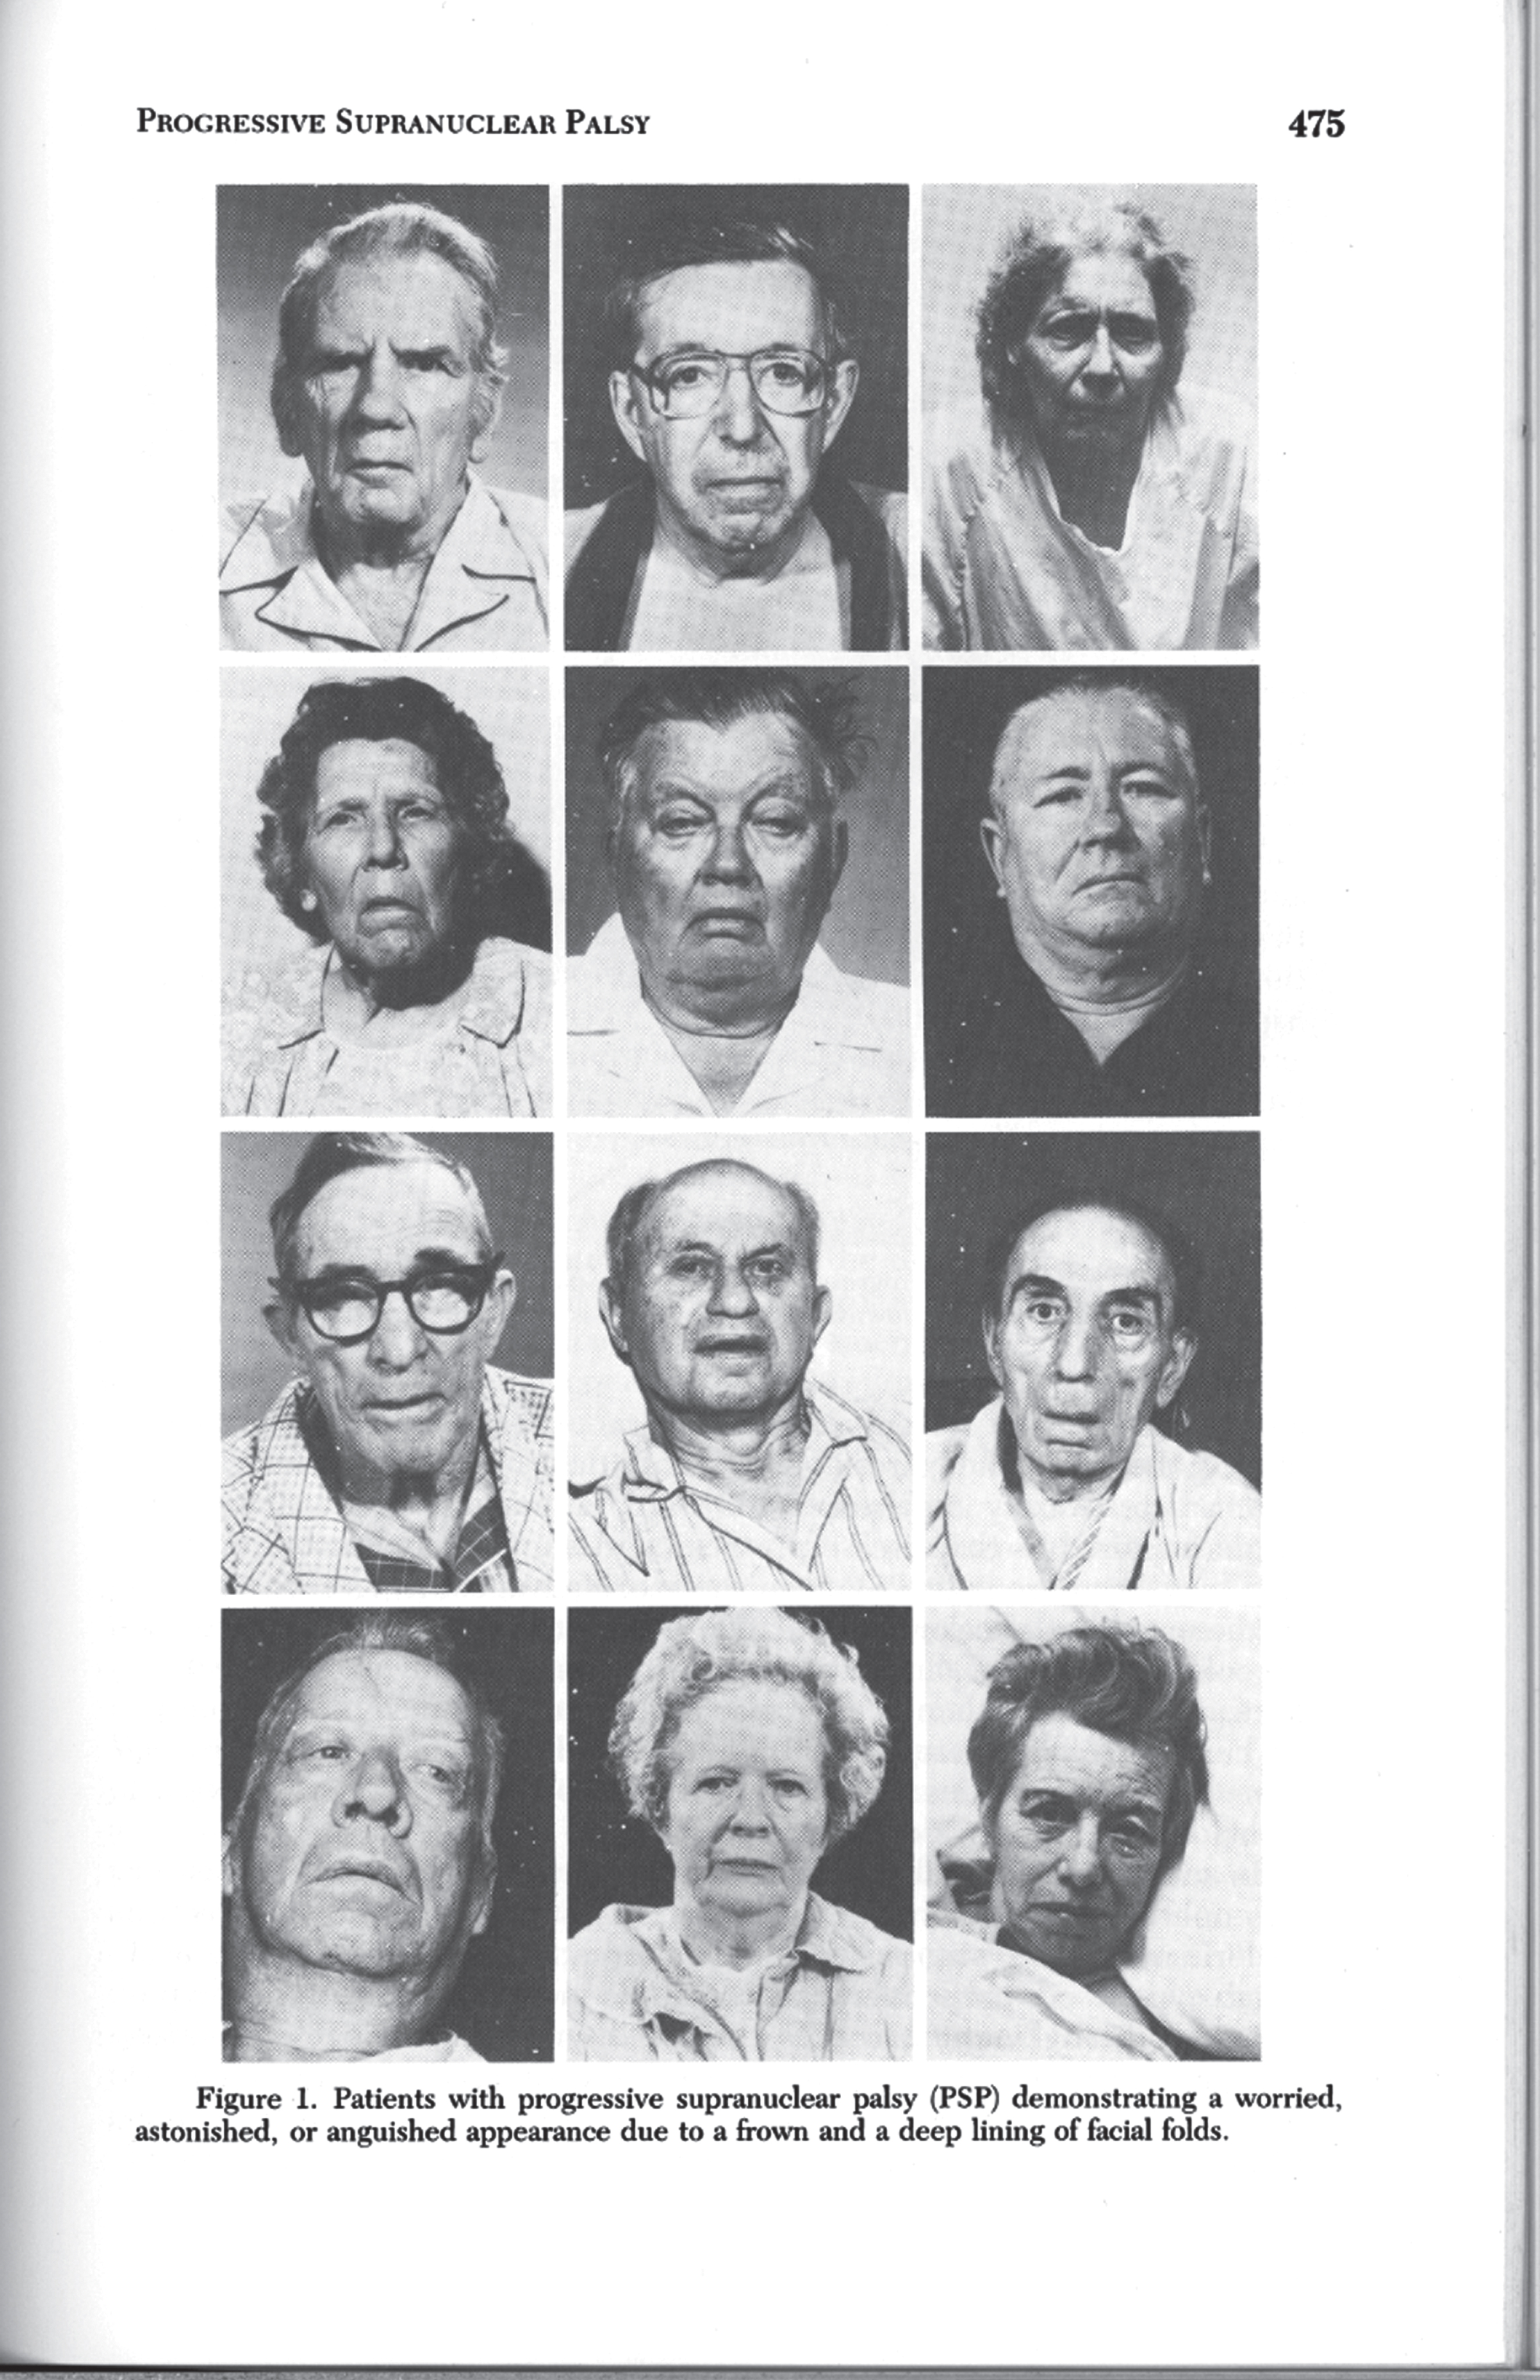 A montage of the distinctive facial appearance typically observed in patients with PSP, demonstrating a worried, anguished, or astonished appearance due to a frowning appearance and a deep lining of nasolabial folds. From Jankovic [1984] (page 475); reproduced with permission.